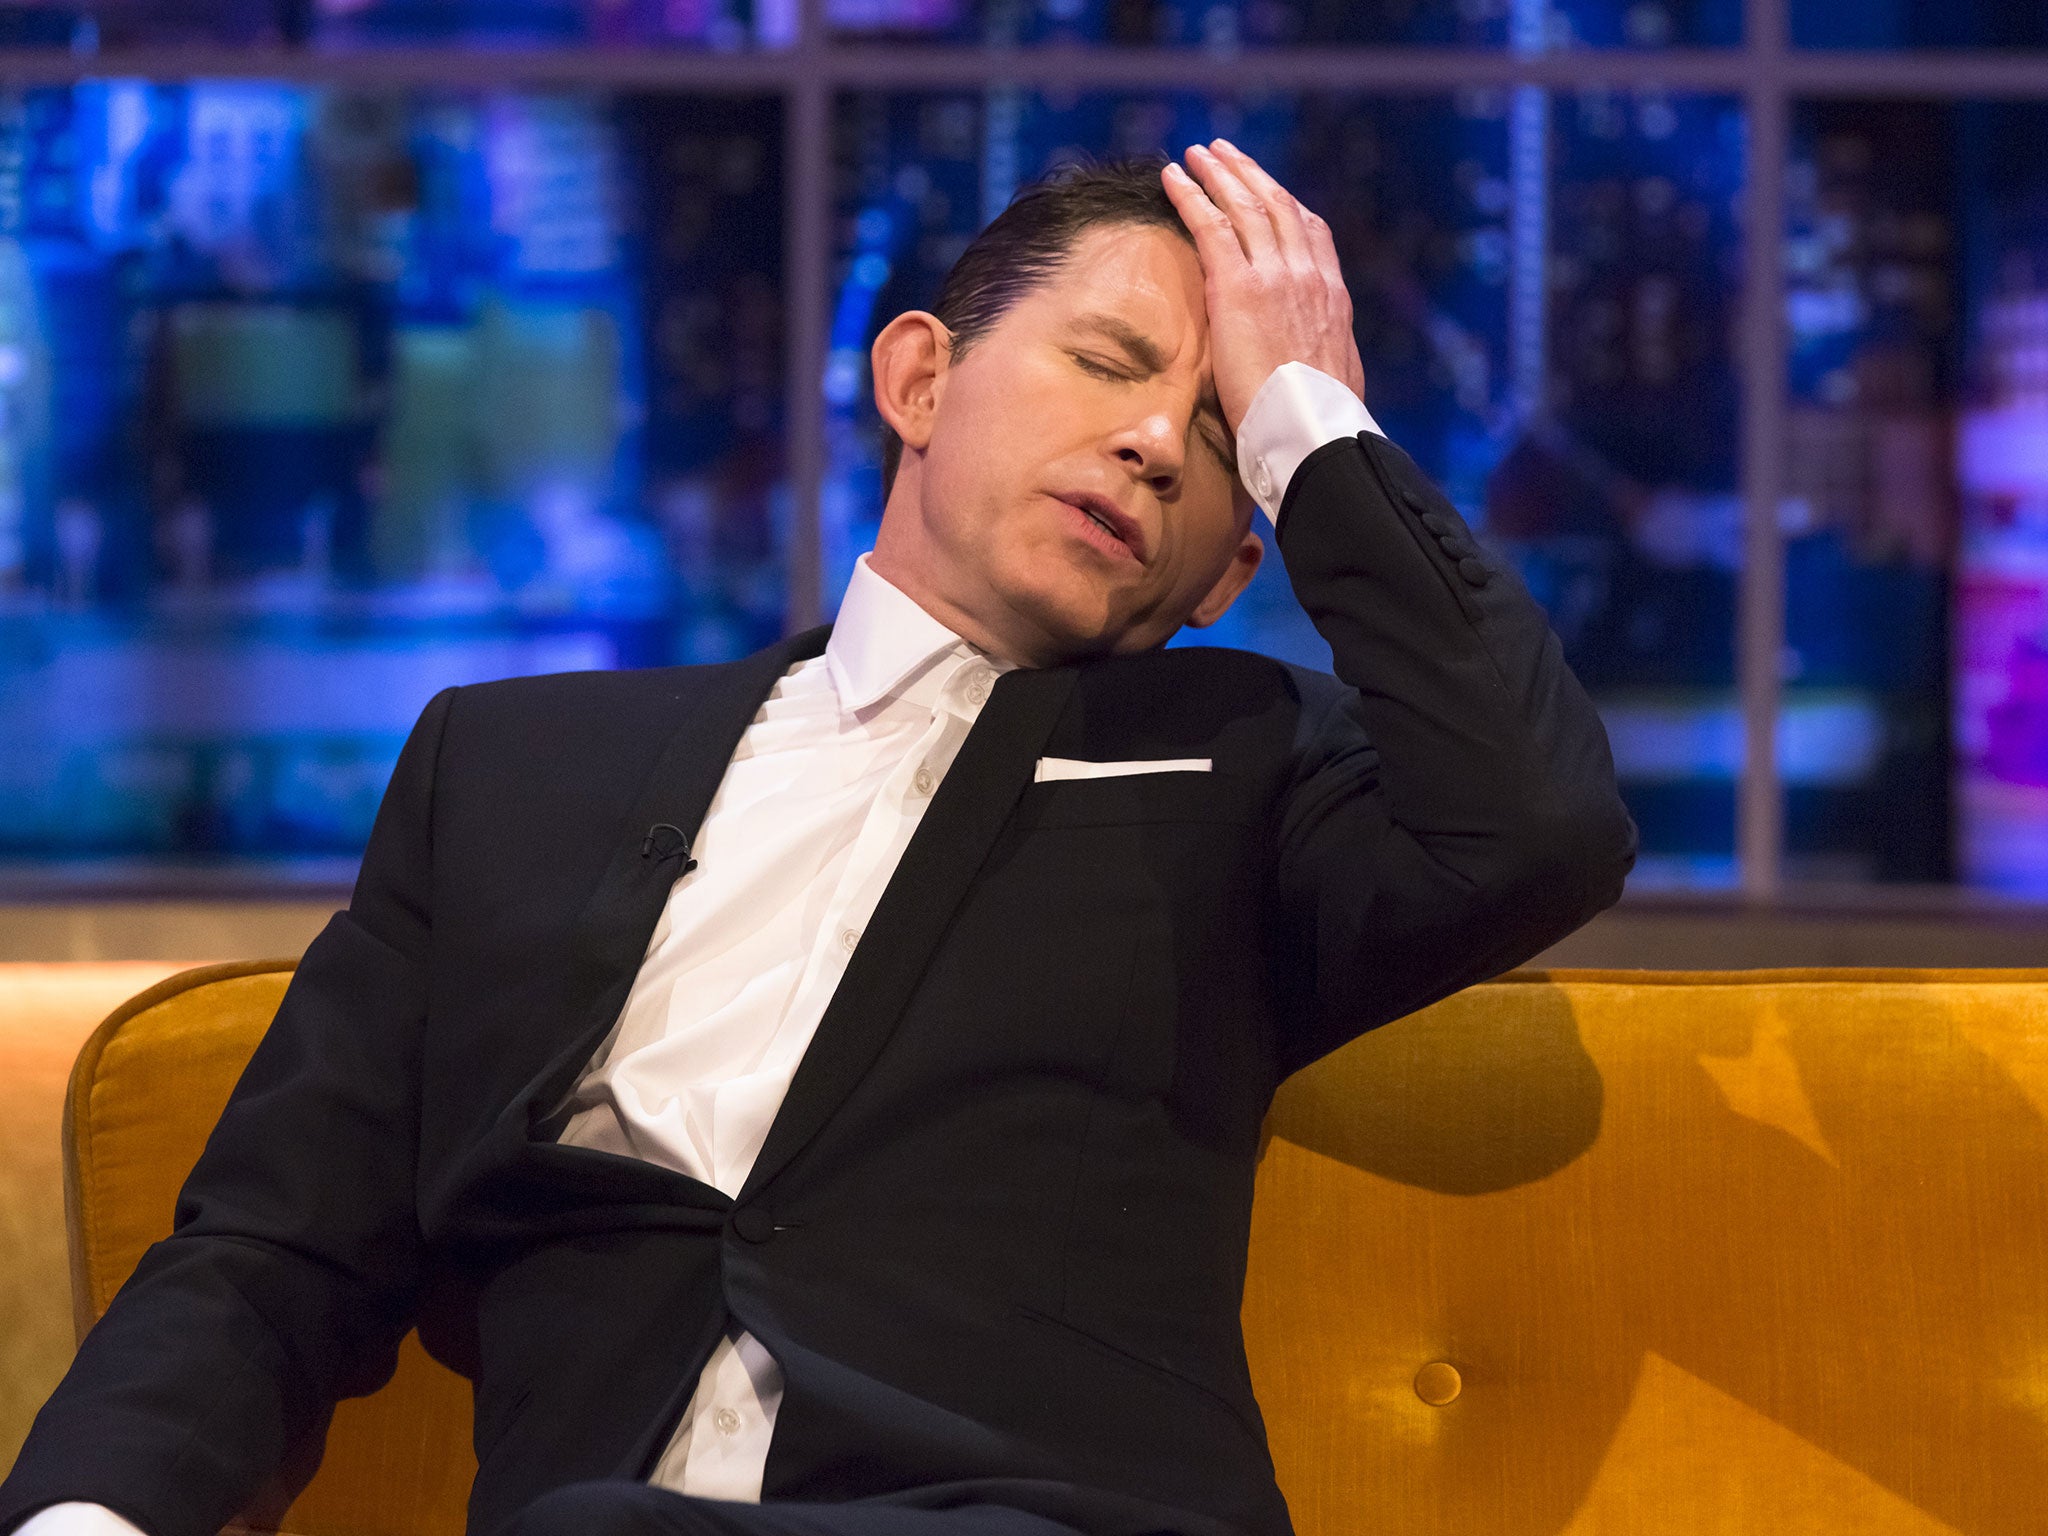 Lee Evans is quitting comedy to spend more time with his wife and daughter